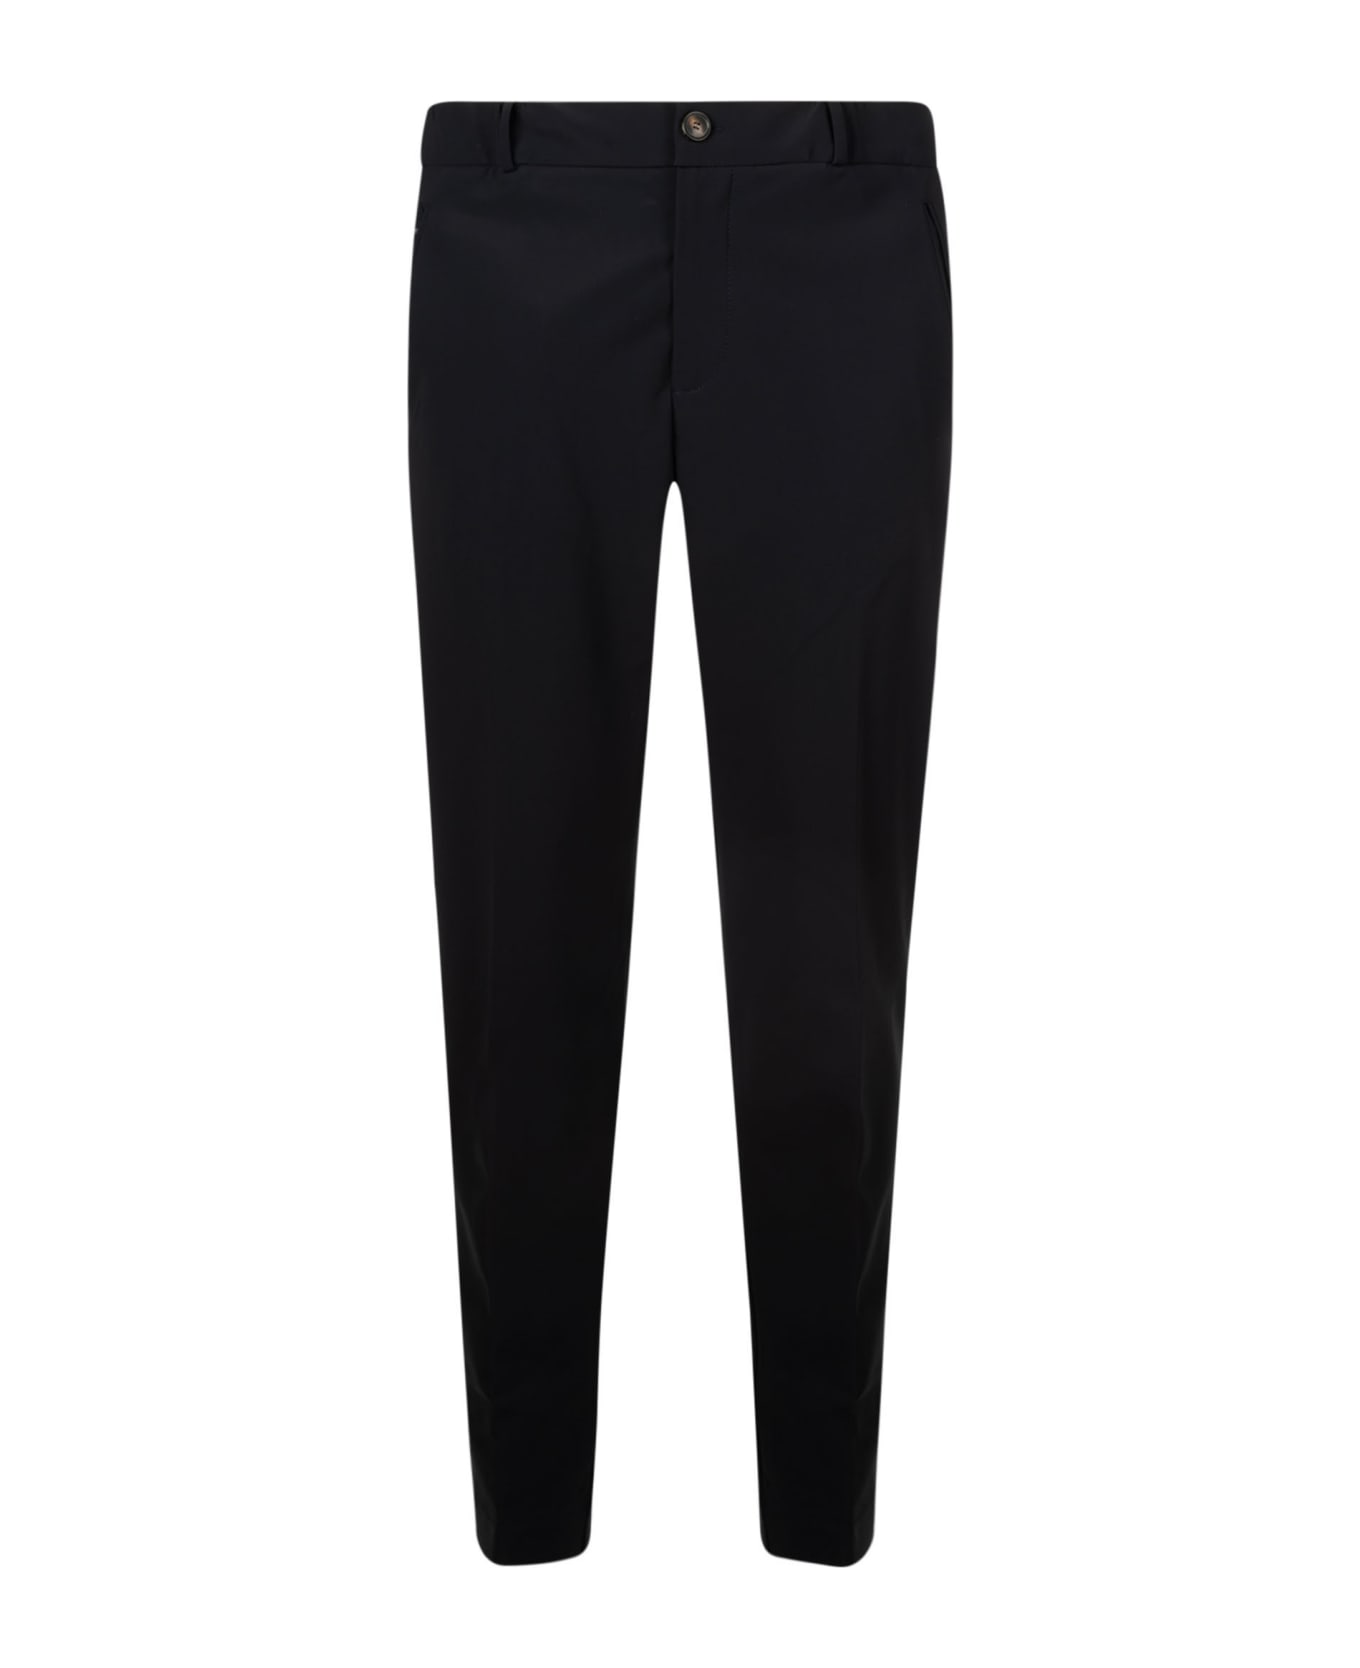 RRD - Roberto Ricci Design Buttoned Fitted Trousers - Blue/Black